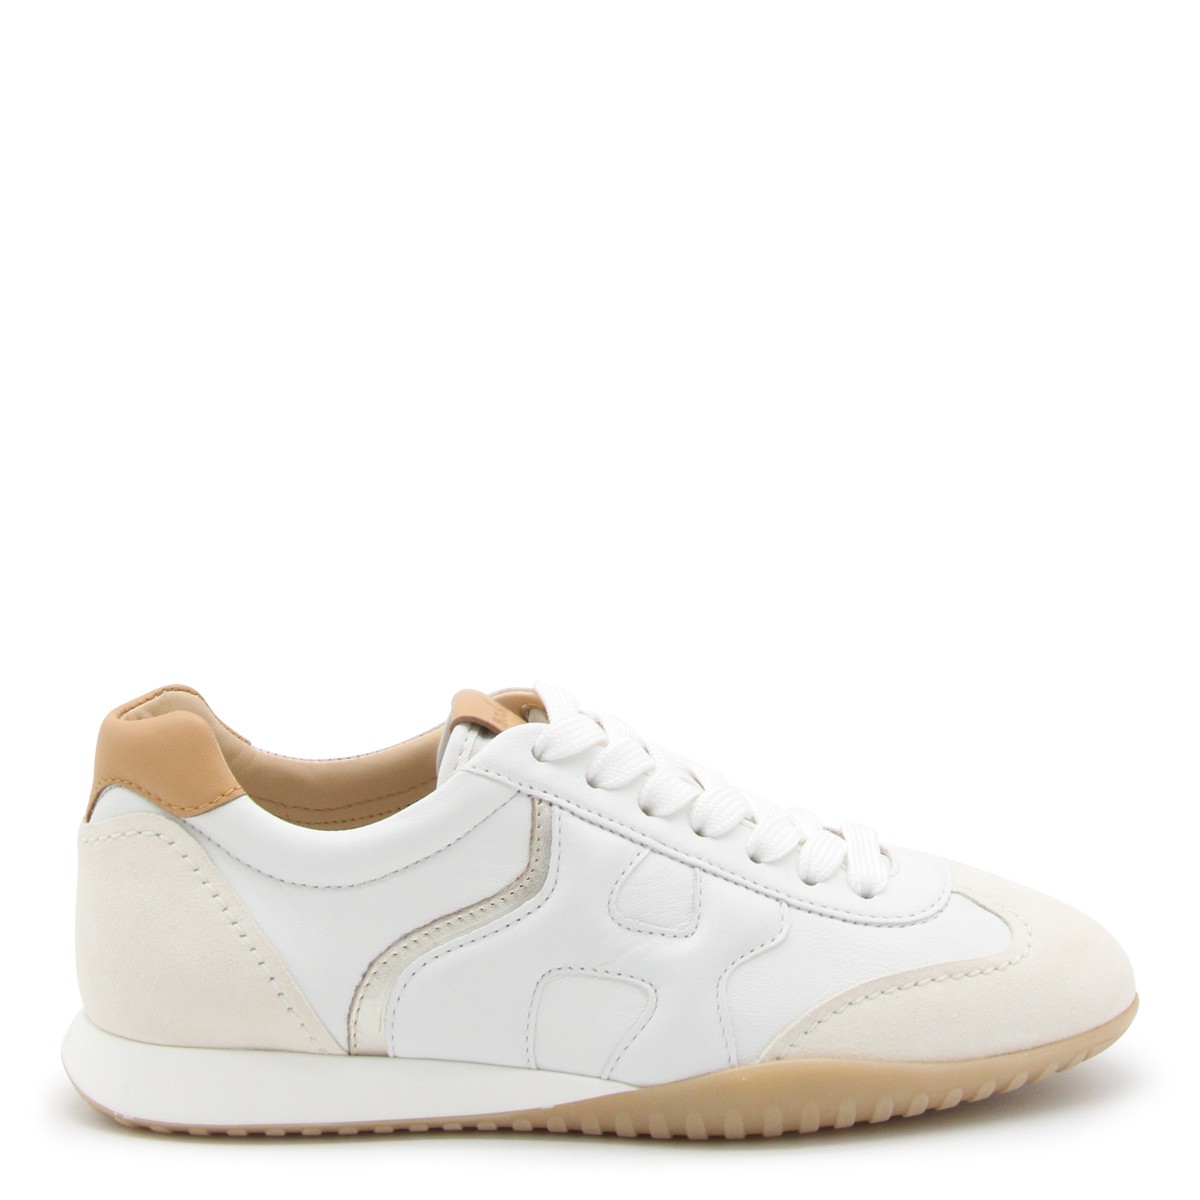 WHITE AND BEIGE LEATHER OLYMPIA-Z SNEAKERS 